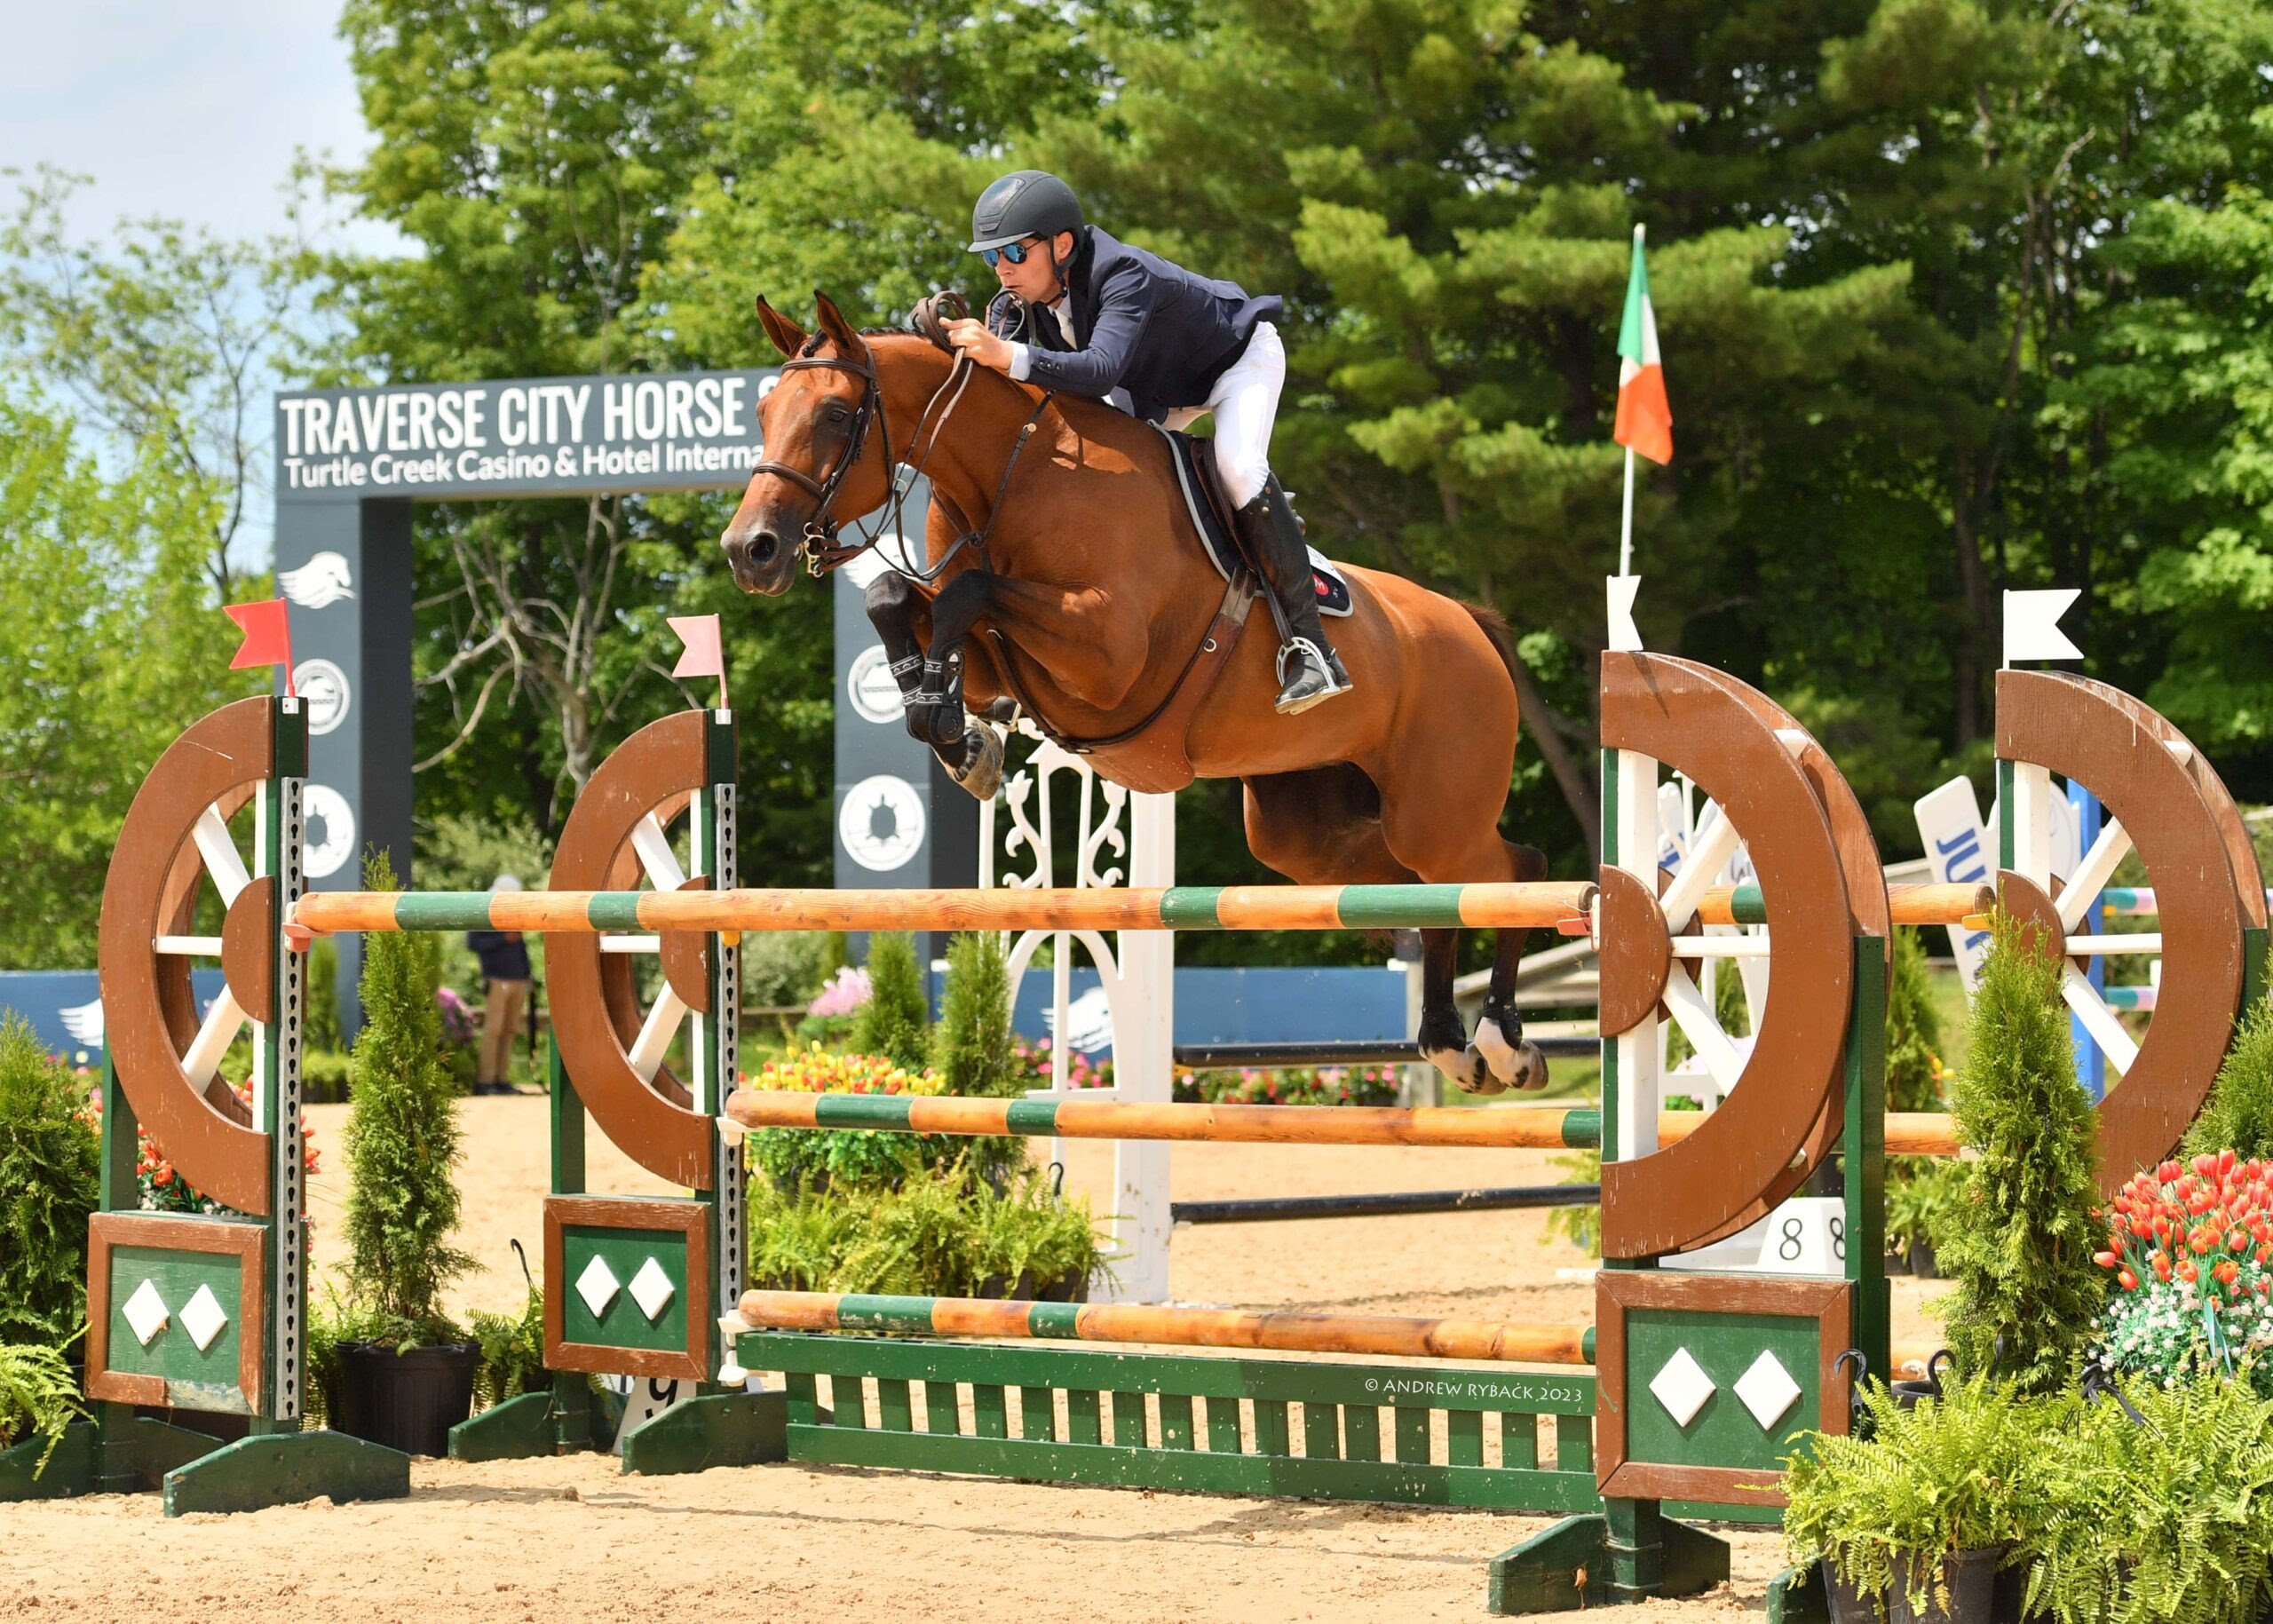 Karl Cook and Caracole de la Roque Cruise to First in $30,000 Traverse City National Grand Prix